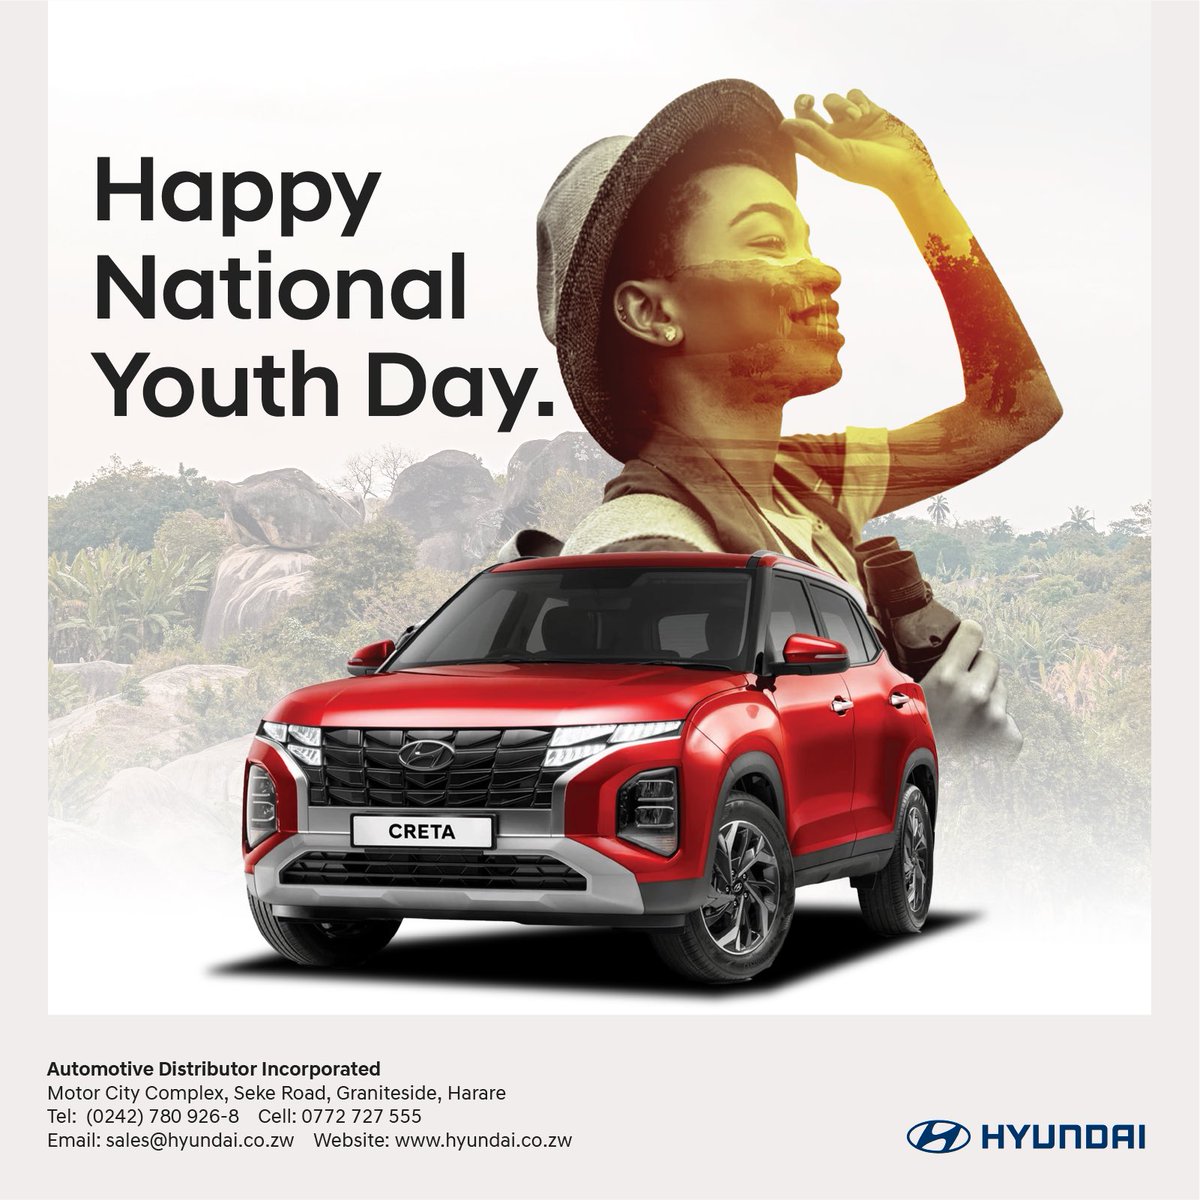 Empowering the next generation of drivers to hit the road with confidence. Happy National Youth Day from Hyundai Zimbabwe!